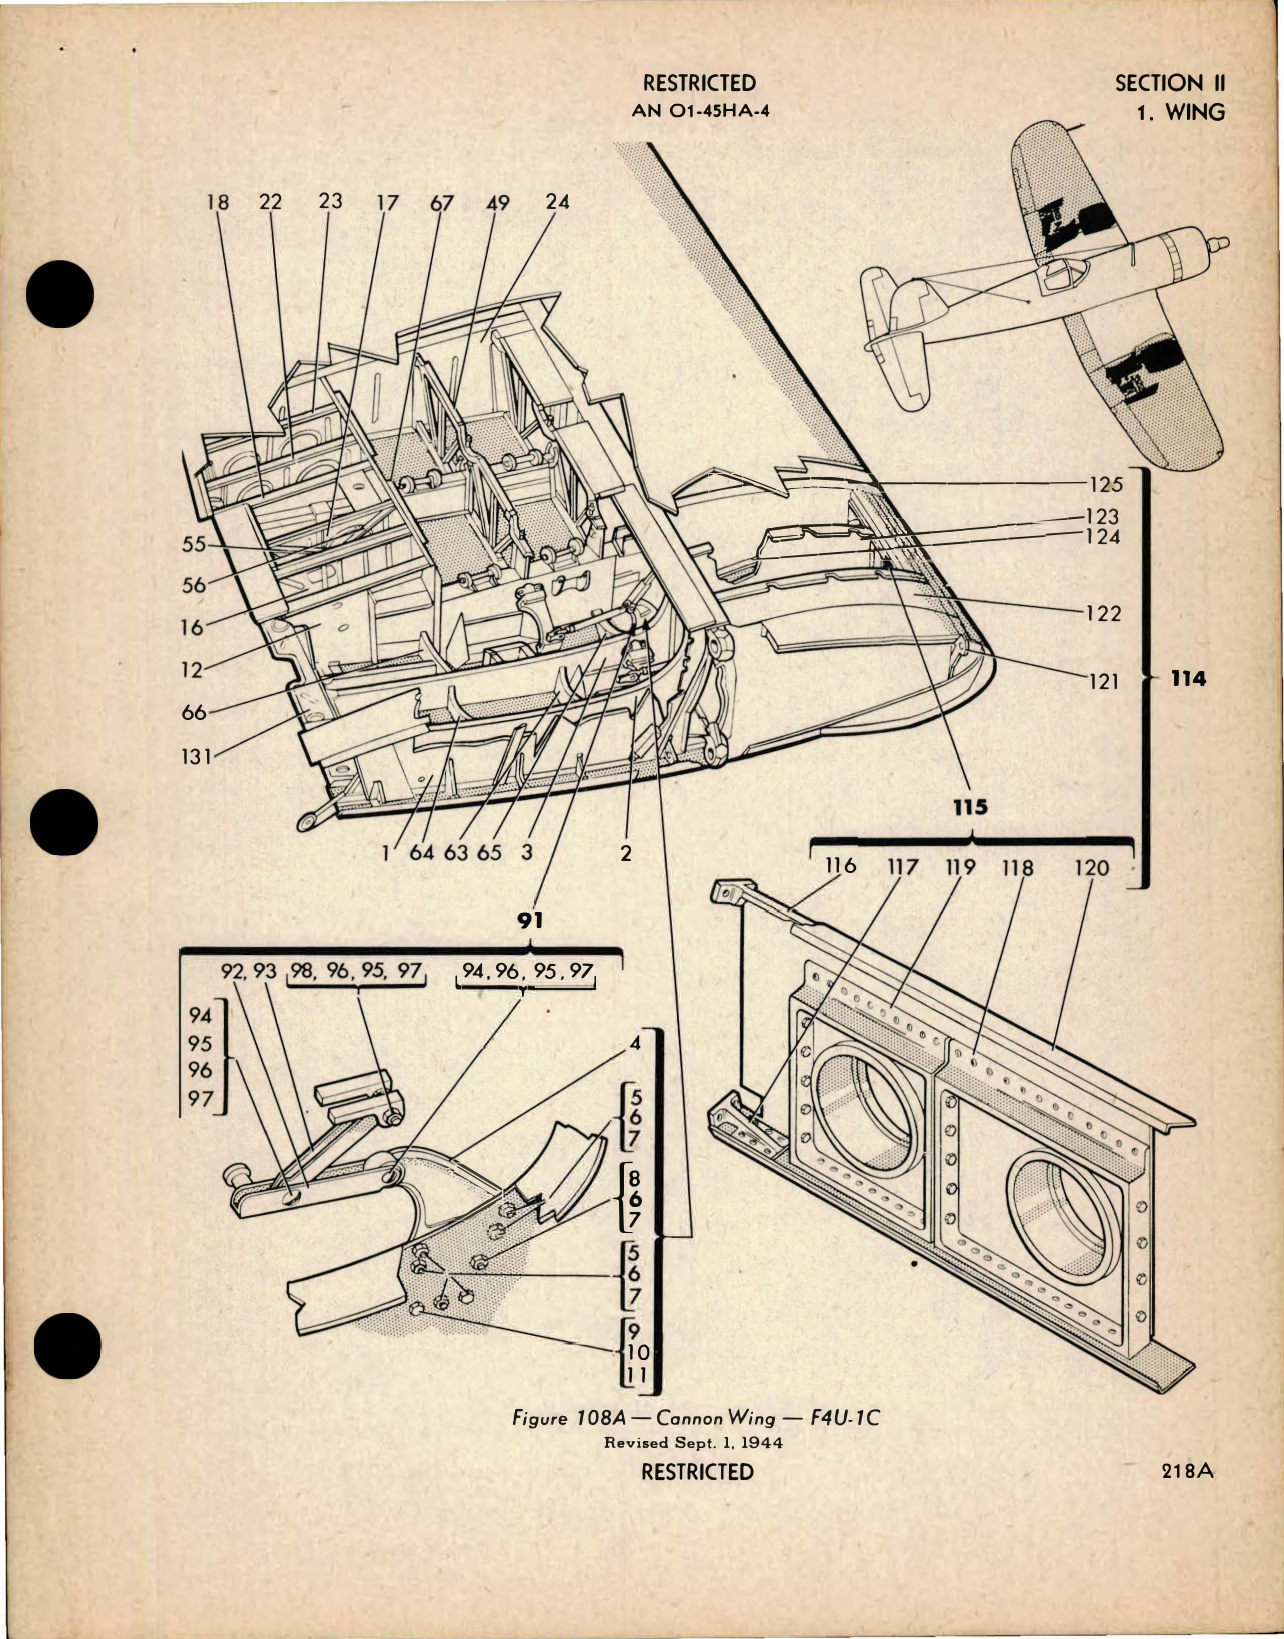 Sample page 7 from AirCorps Library document: Parts Catalog for Navy Models F4U-1, F3A-1, FG-1, and British Models Corsair I - II - III